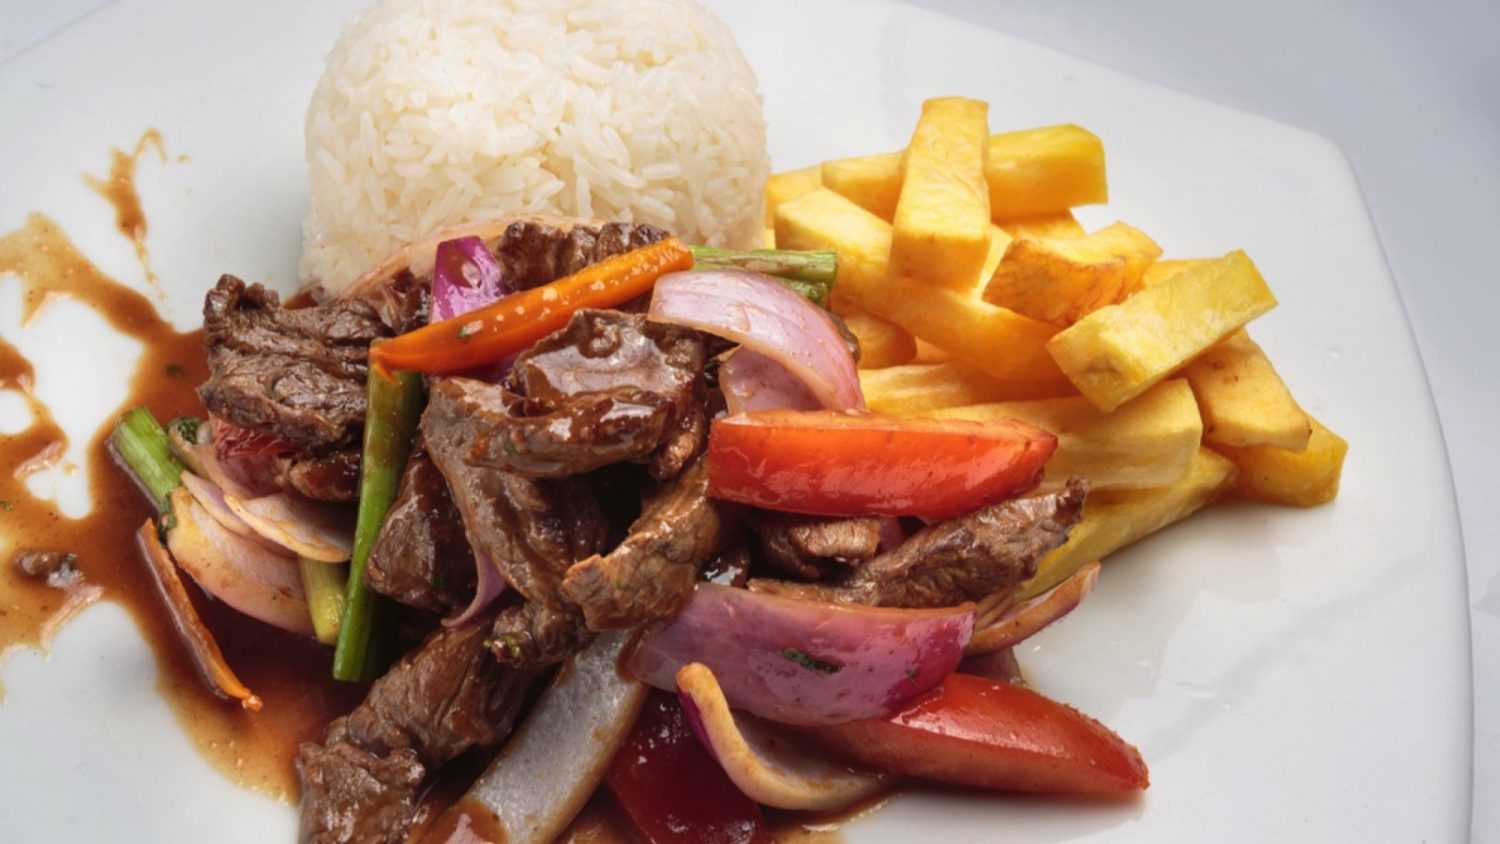 Peruvian food "lomo saltado":A salted beef with tomatoes, onion, fried potatoes and rice.